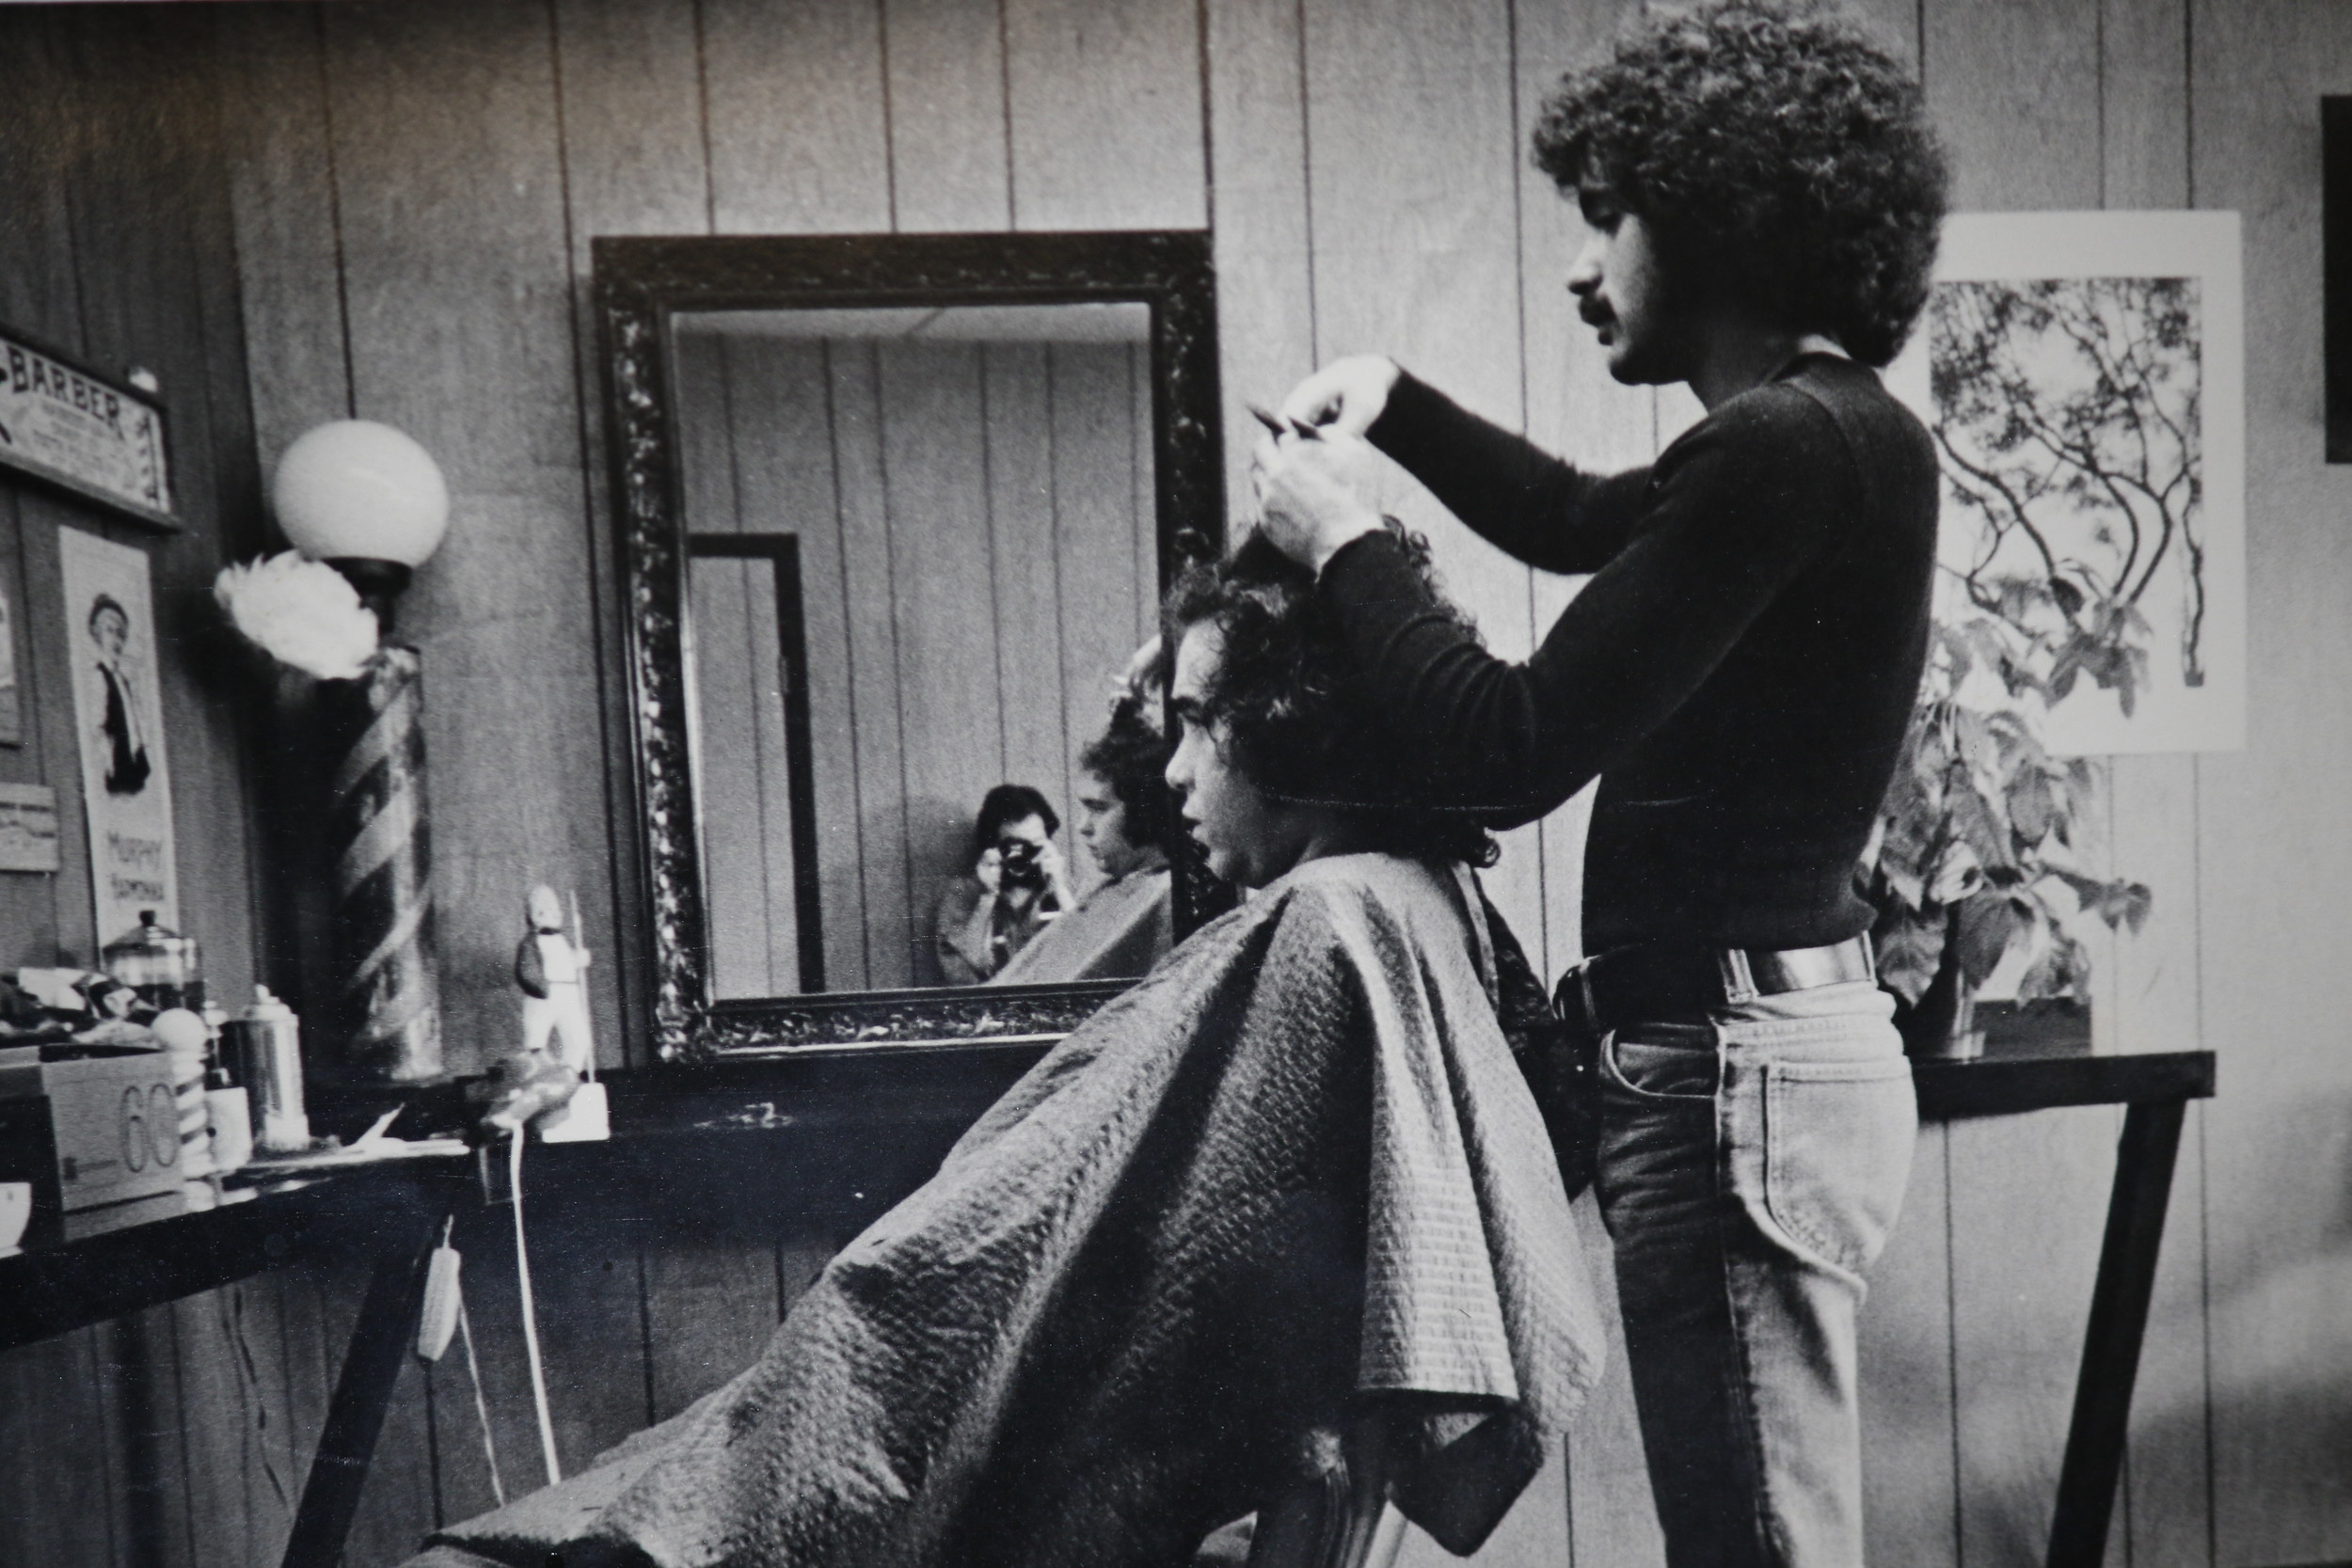 Tony Sarica opened his own shop, Tonsorial Artists, in Lynbrook in 1974, and sold it in 2002. He has worked at Trilogy Hair Salon, on Lincoln Place, for nearly 15 years.